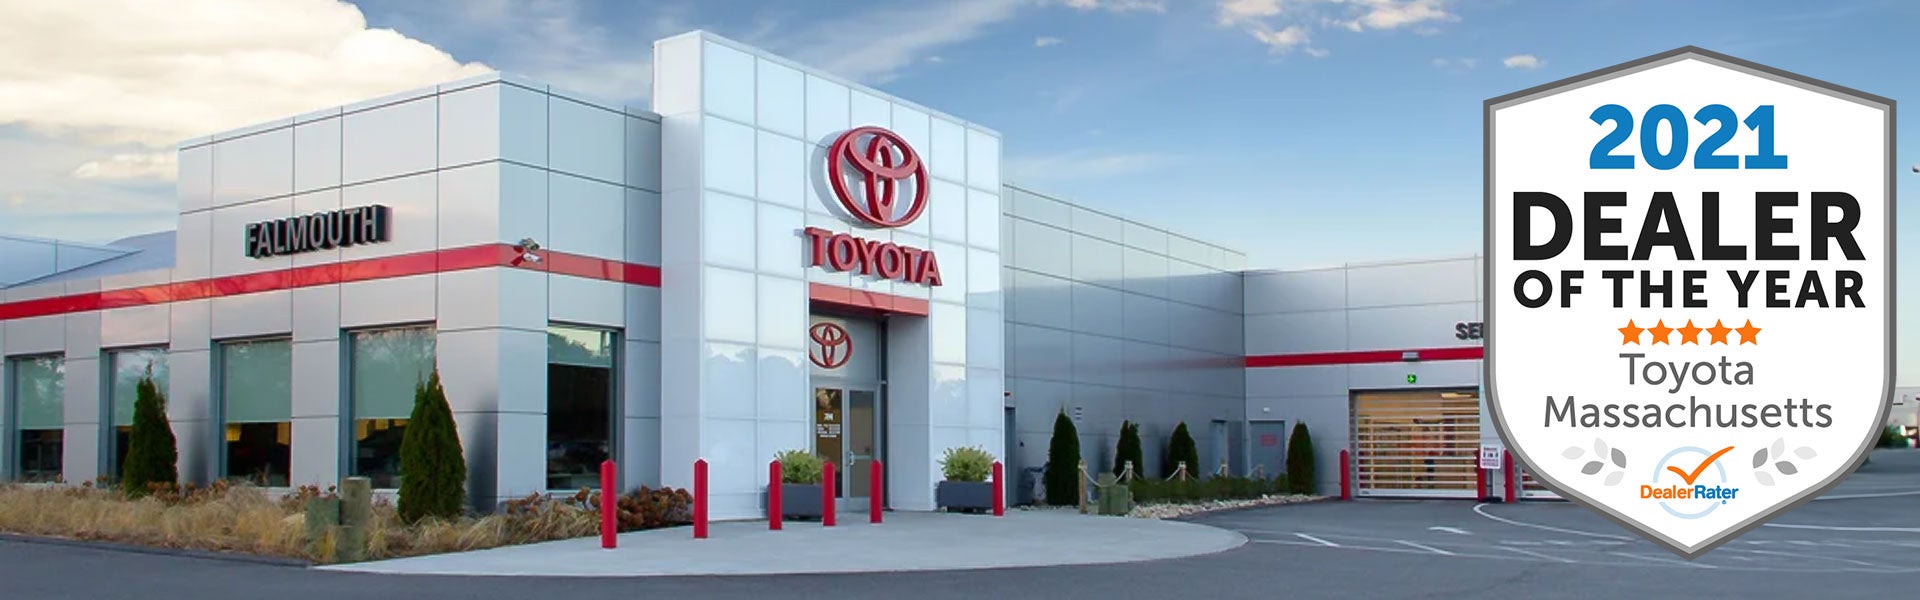 2021 Massachusetts Toyota Dealer of The Year Falmouth Toyota